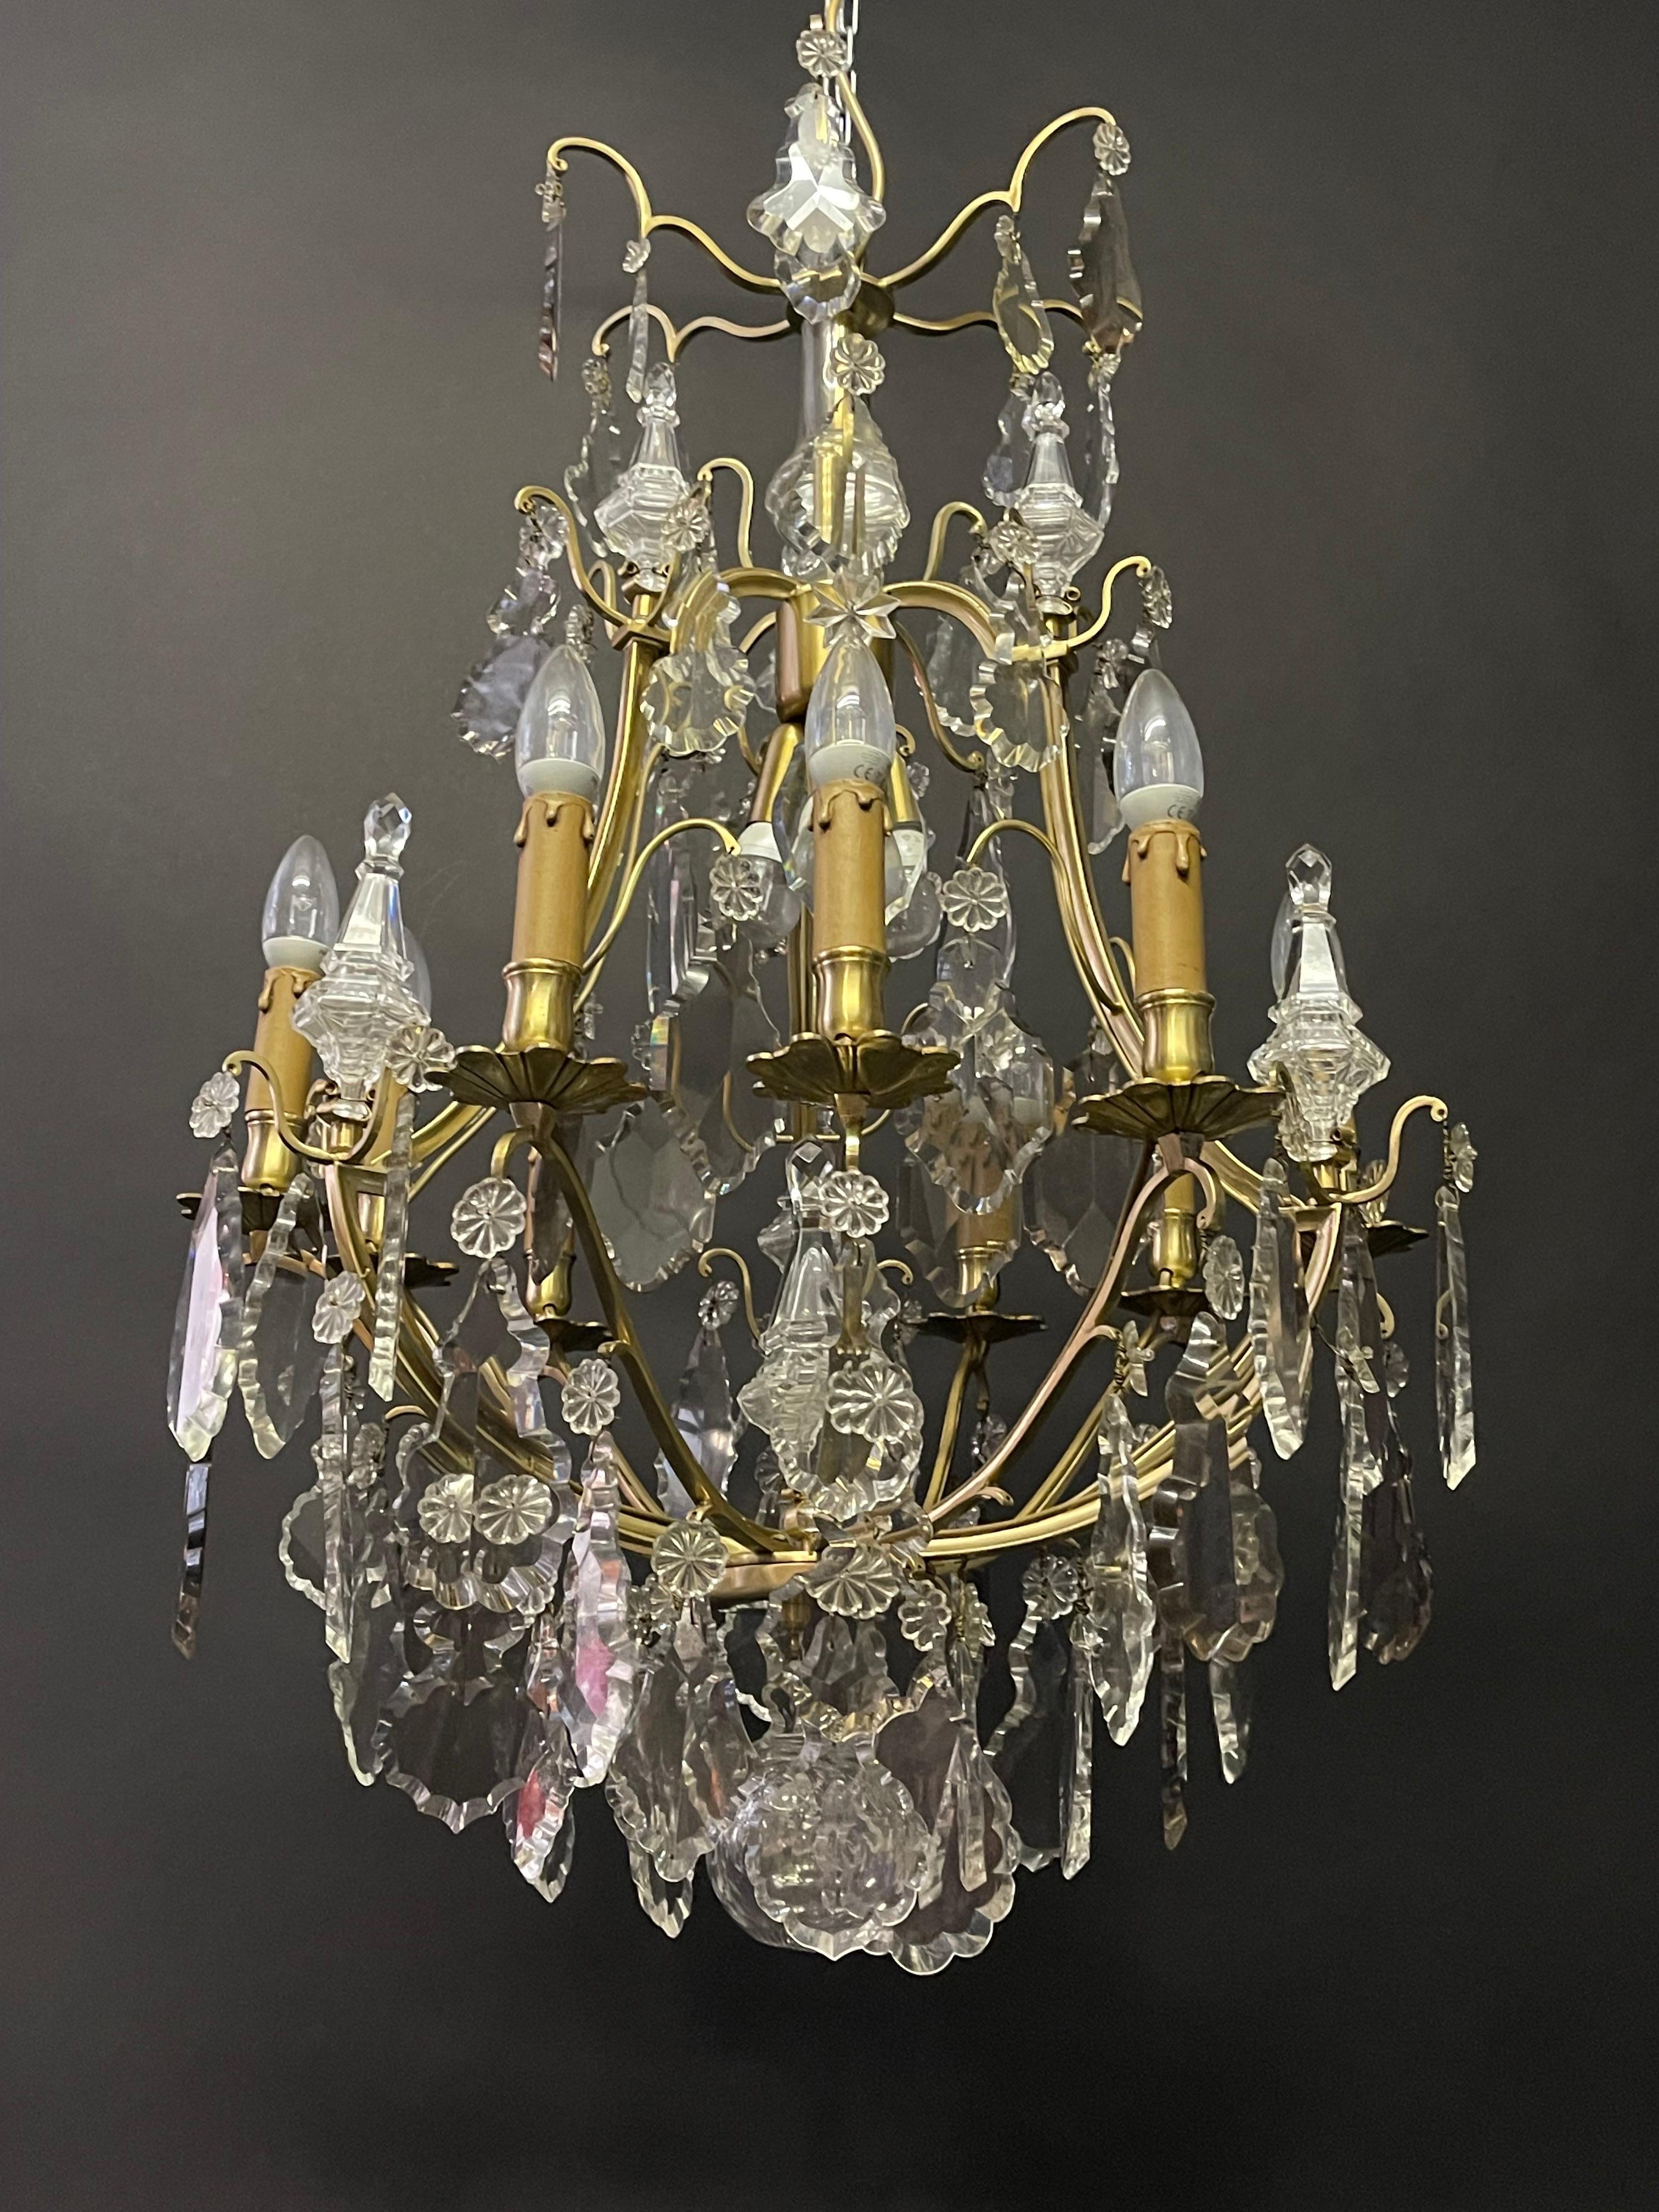 French 19th Century Louis XV Style Gilt Bronze and Crystal Chandelier In Excellent Condition For Sale In Wiesbaden, Hessen